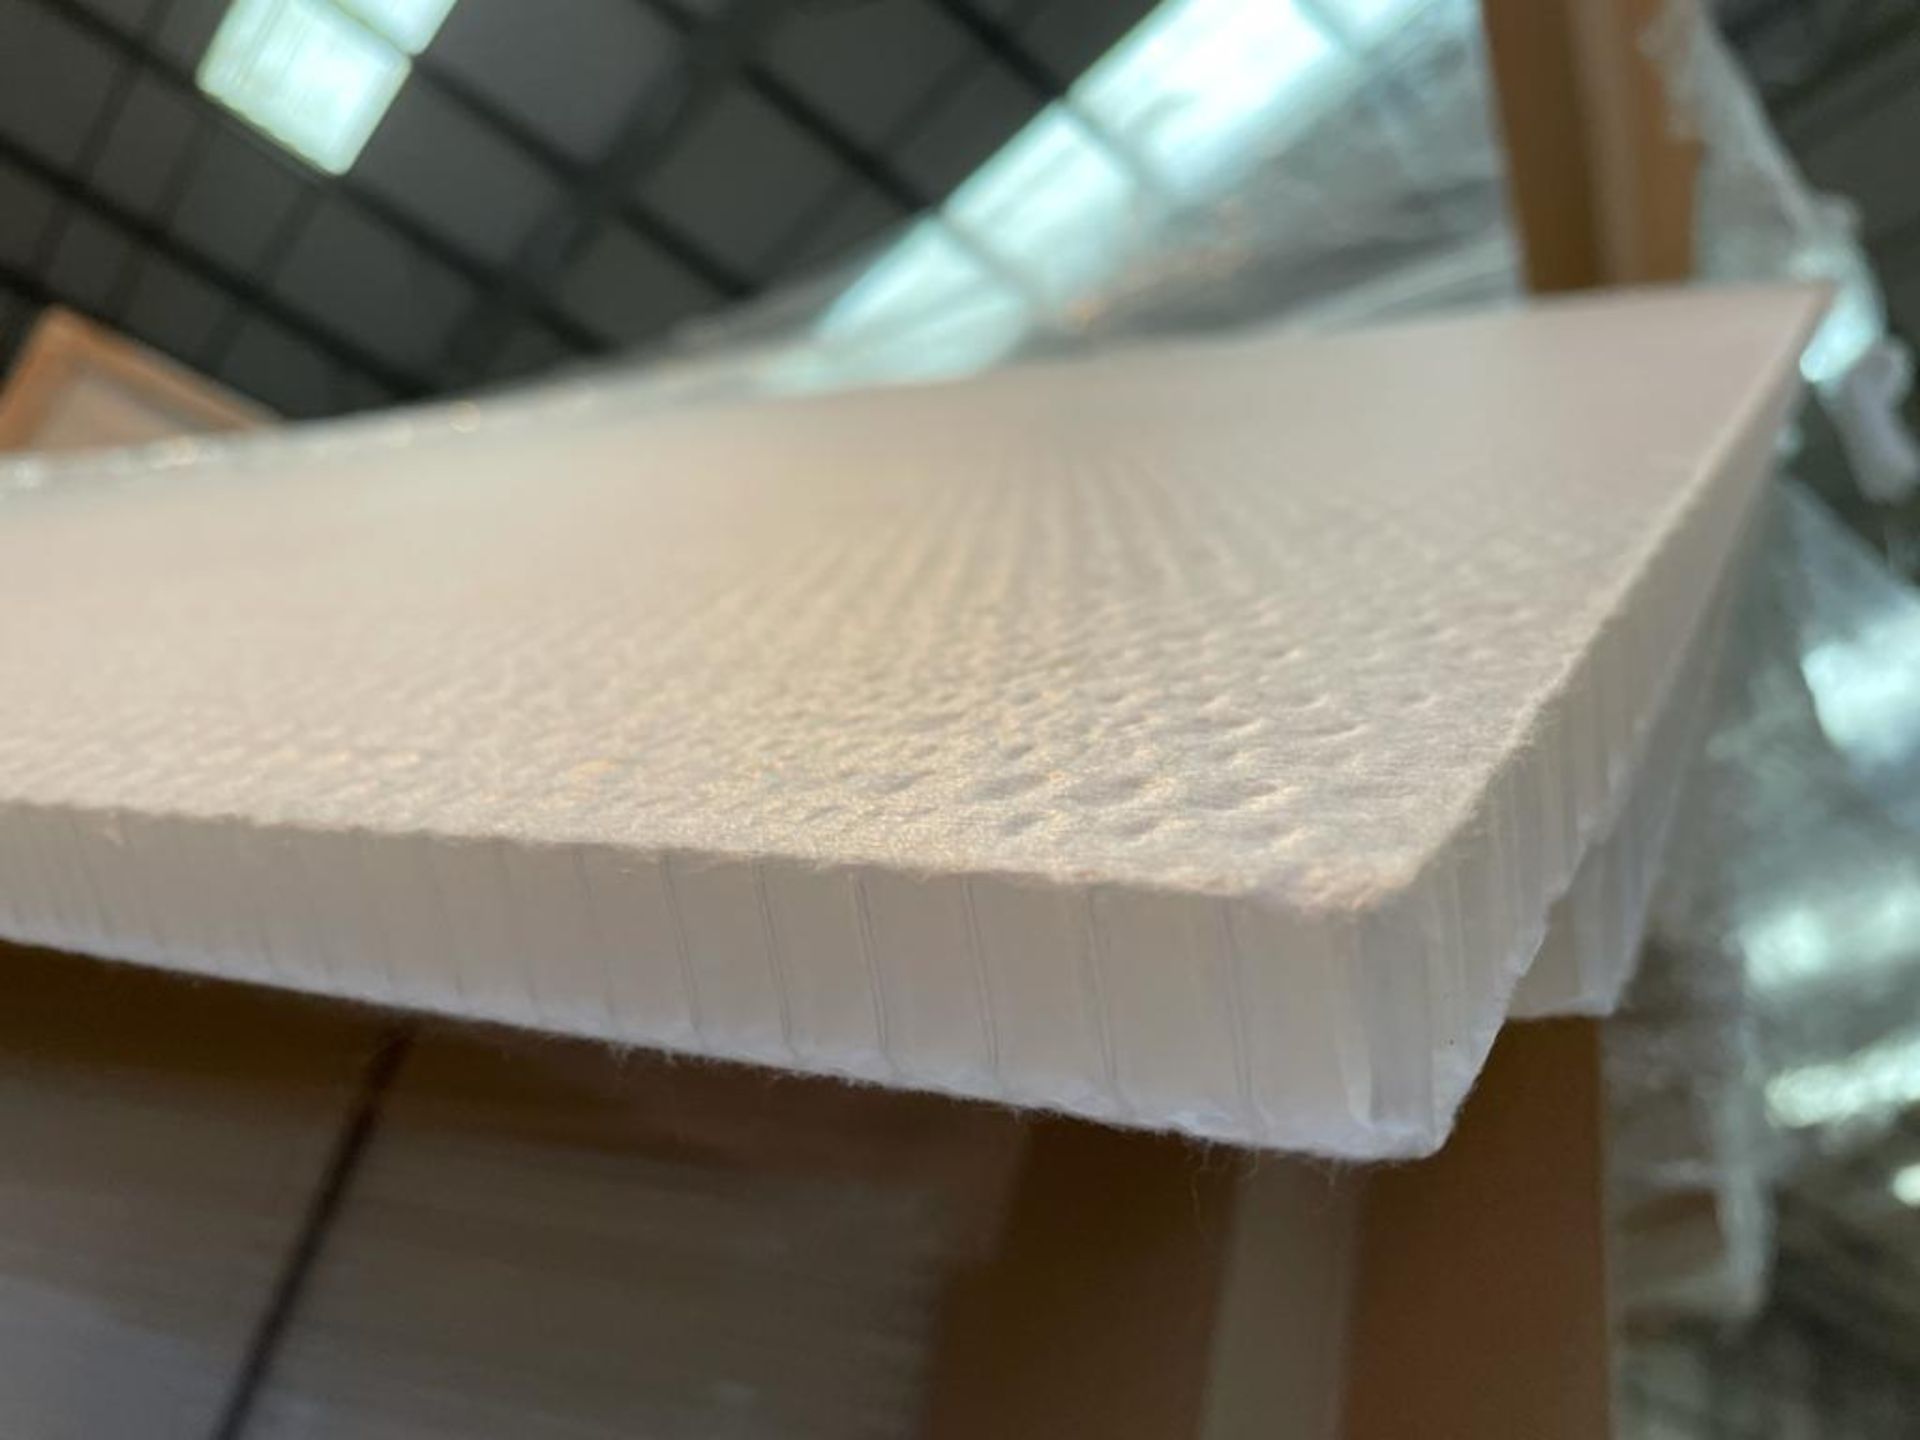 50 x ThermHex Thermoplastic Honeycomb Core Panels - Size 693 x 1210 x 18mm - New Stock - Lightweight - Image 6 of 8